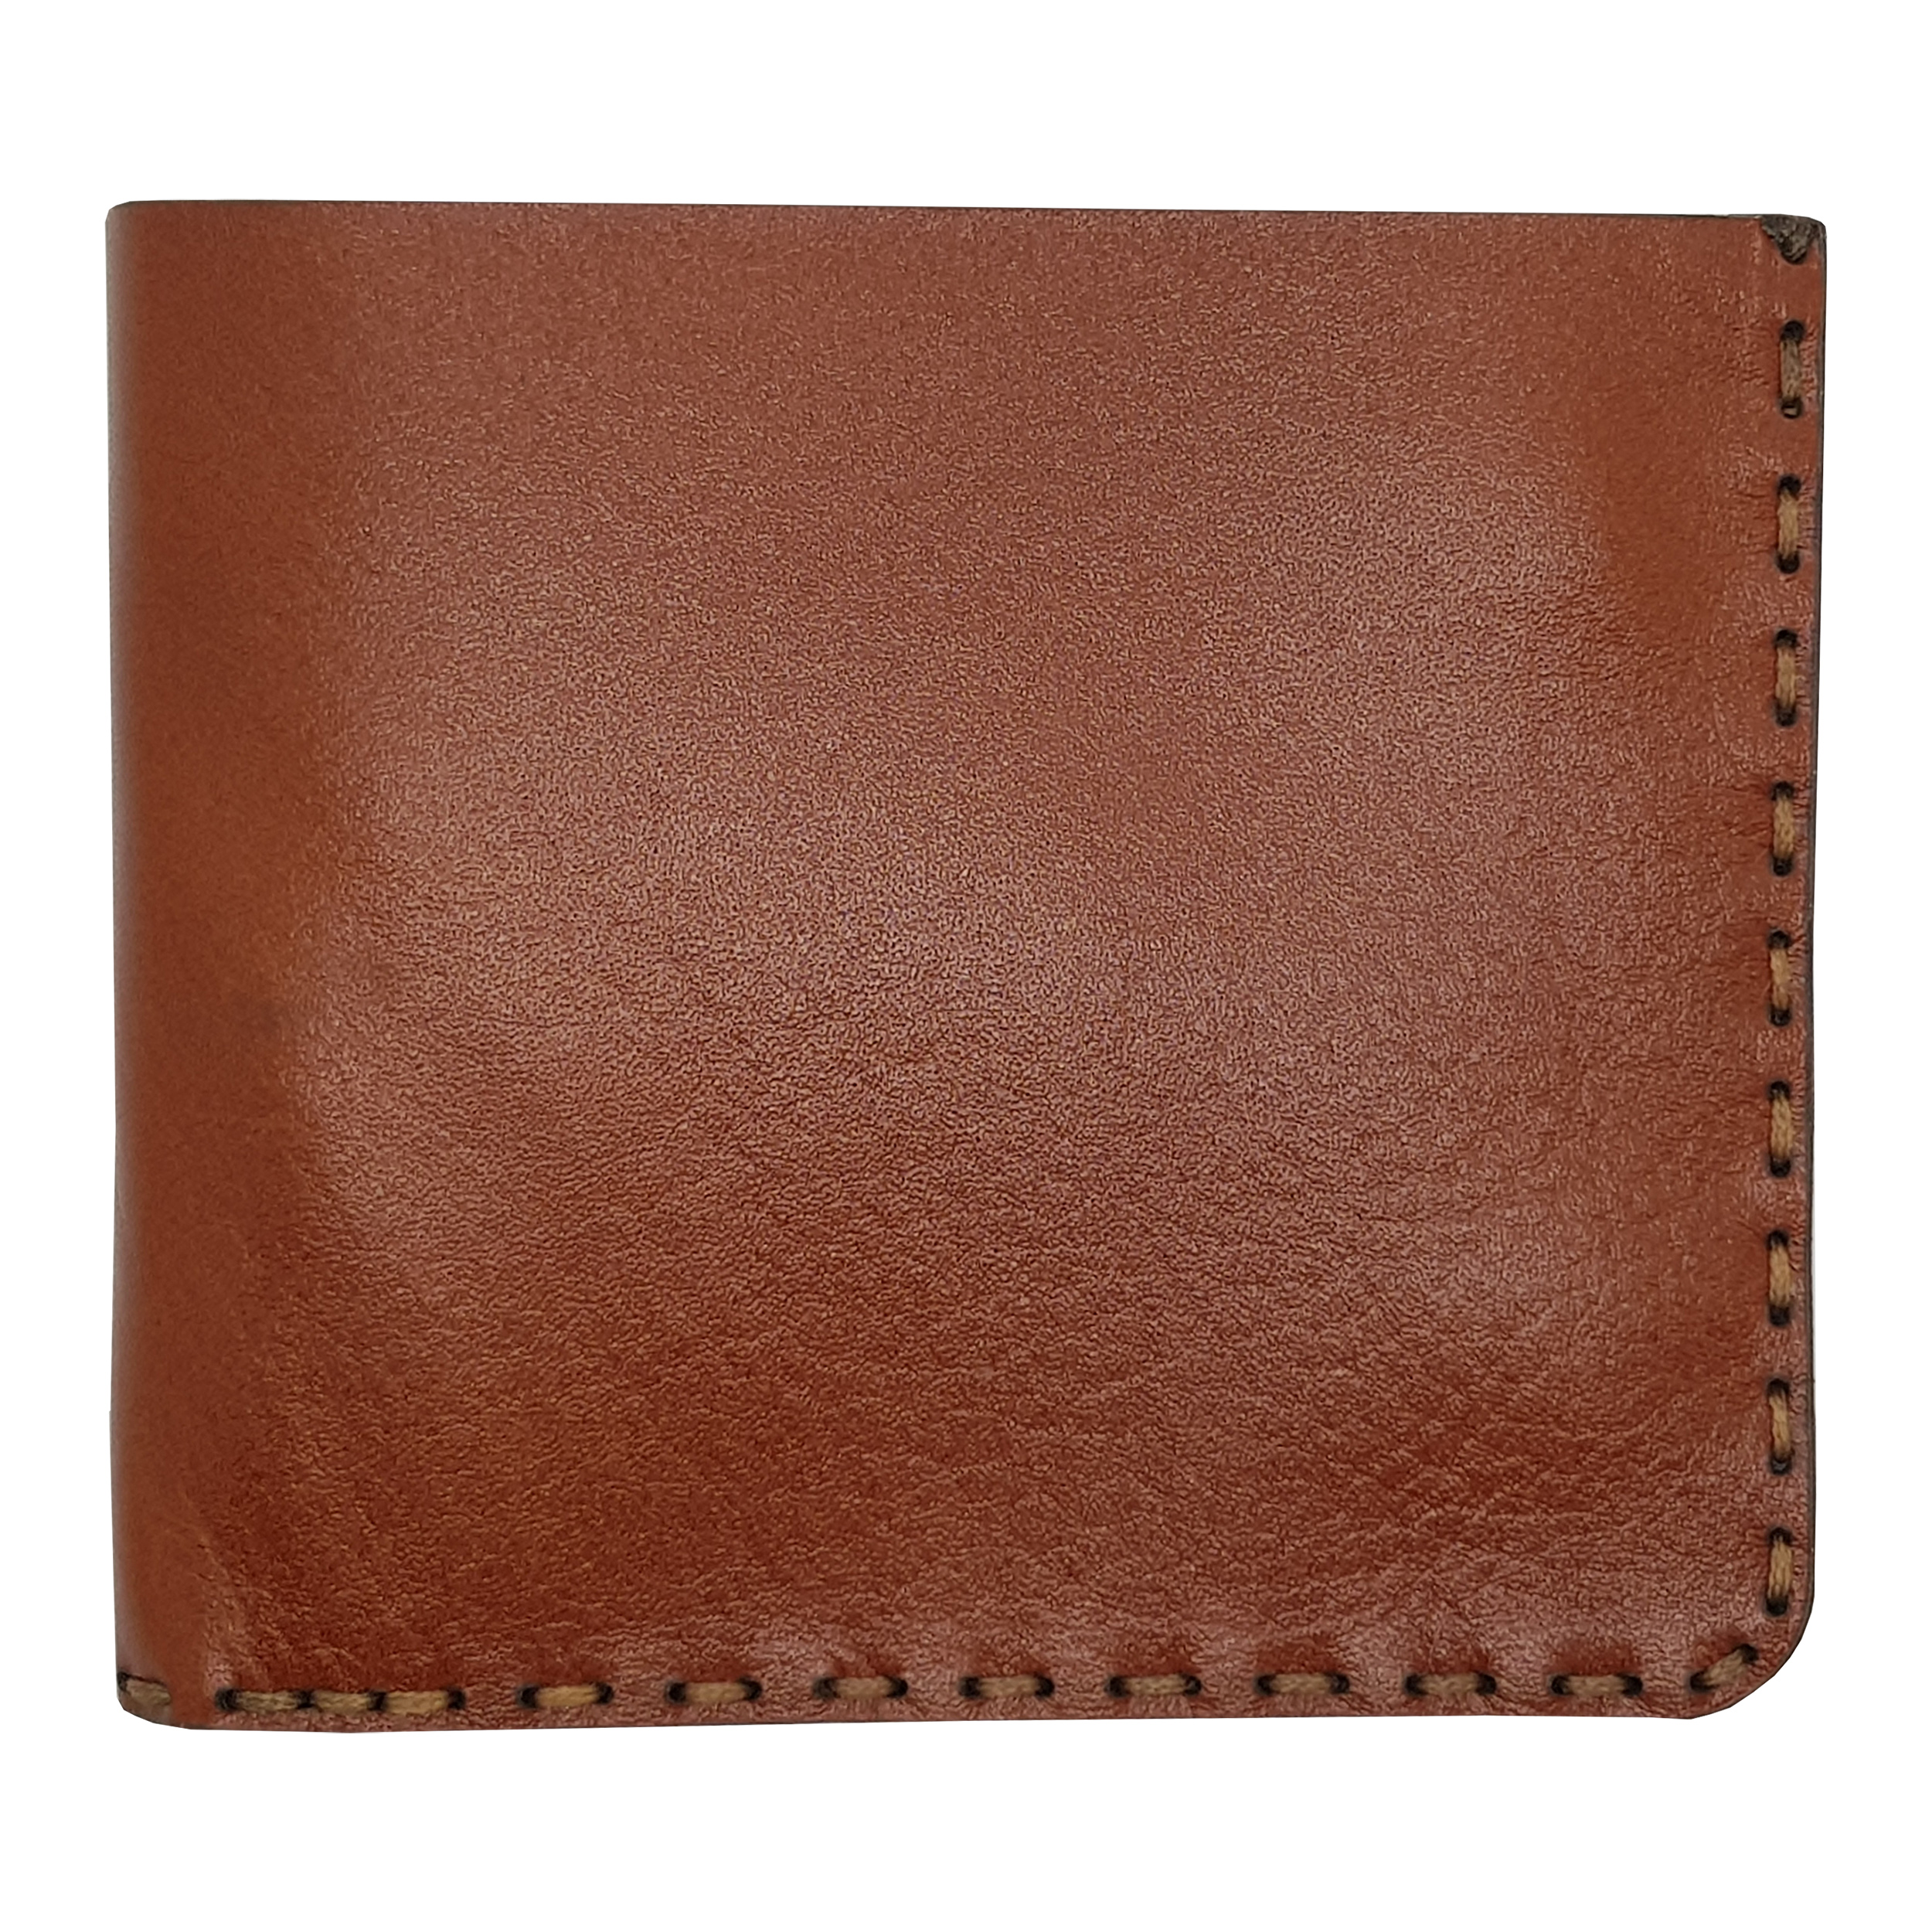 leather wallet, DIYAKO leather, model mpd100